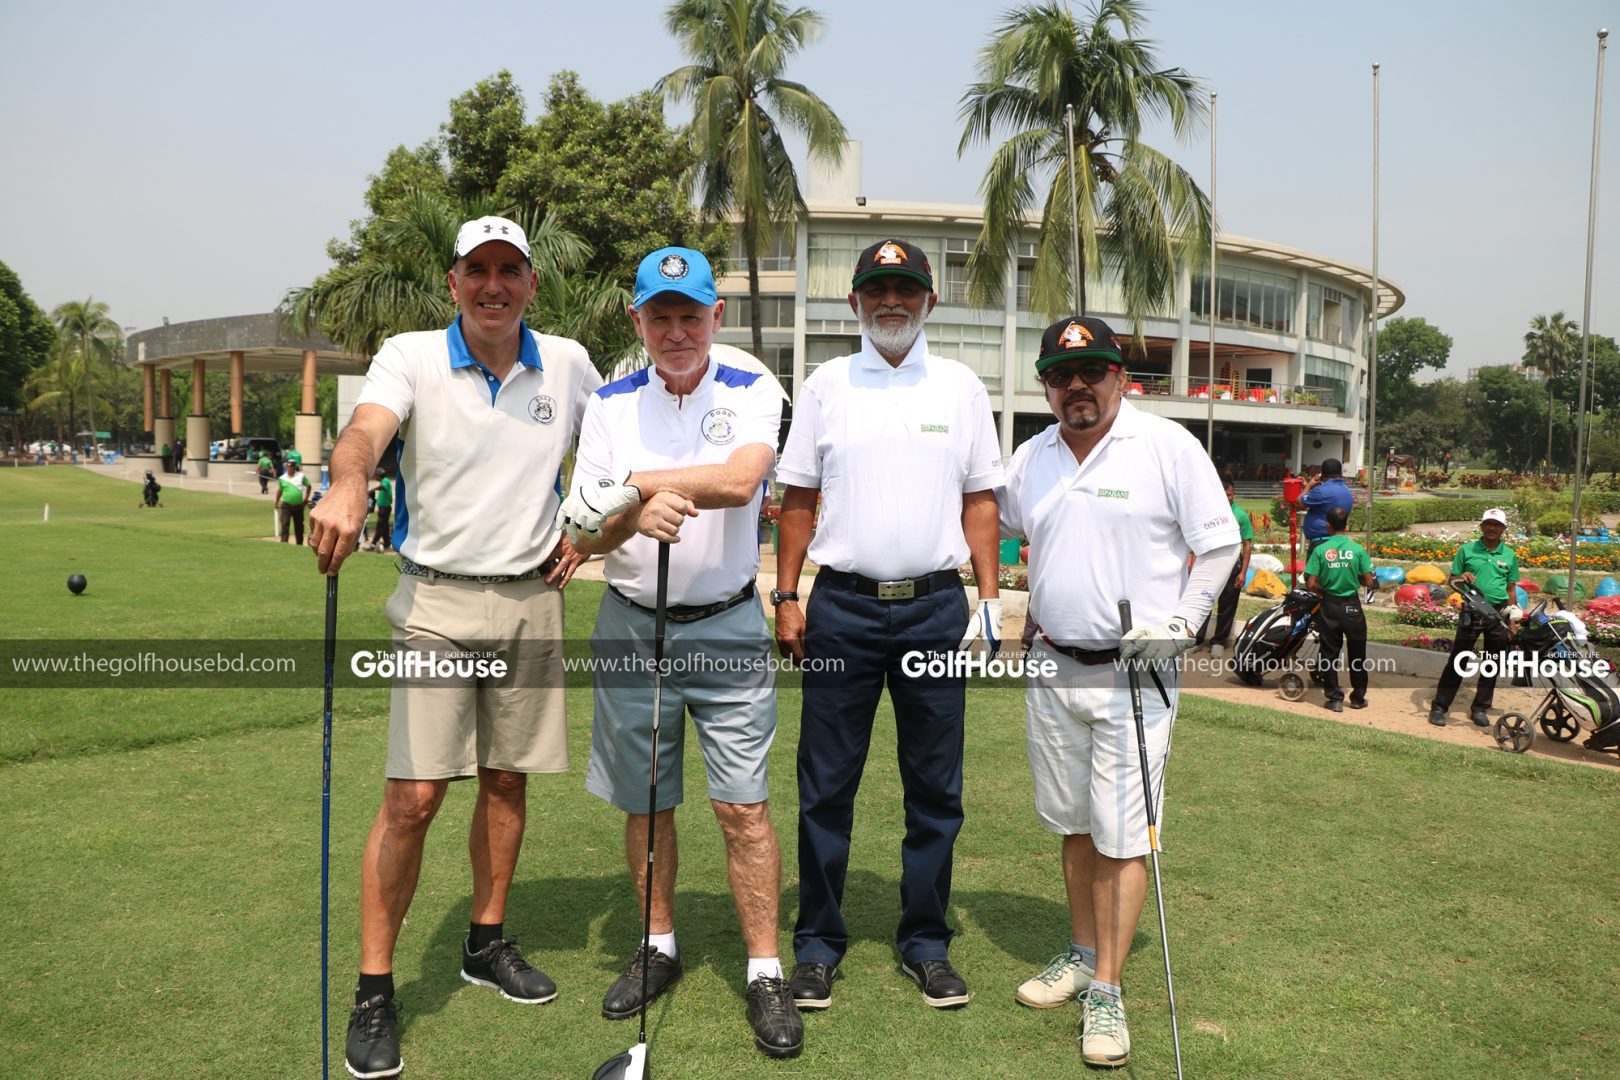 THE DOGS VS CATS GAME WAS PLAYED ON 7TH OF MARCH AT KGC DHAKA WHERE CATS MADE IT ONCE AGAIN A VERY SPECIAL DAY OF GOLF!!!